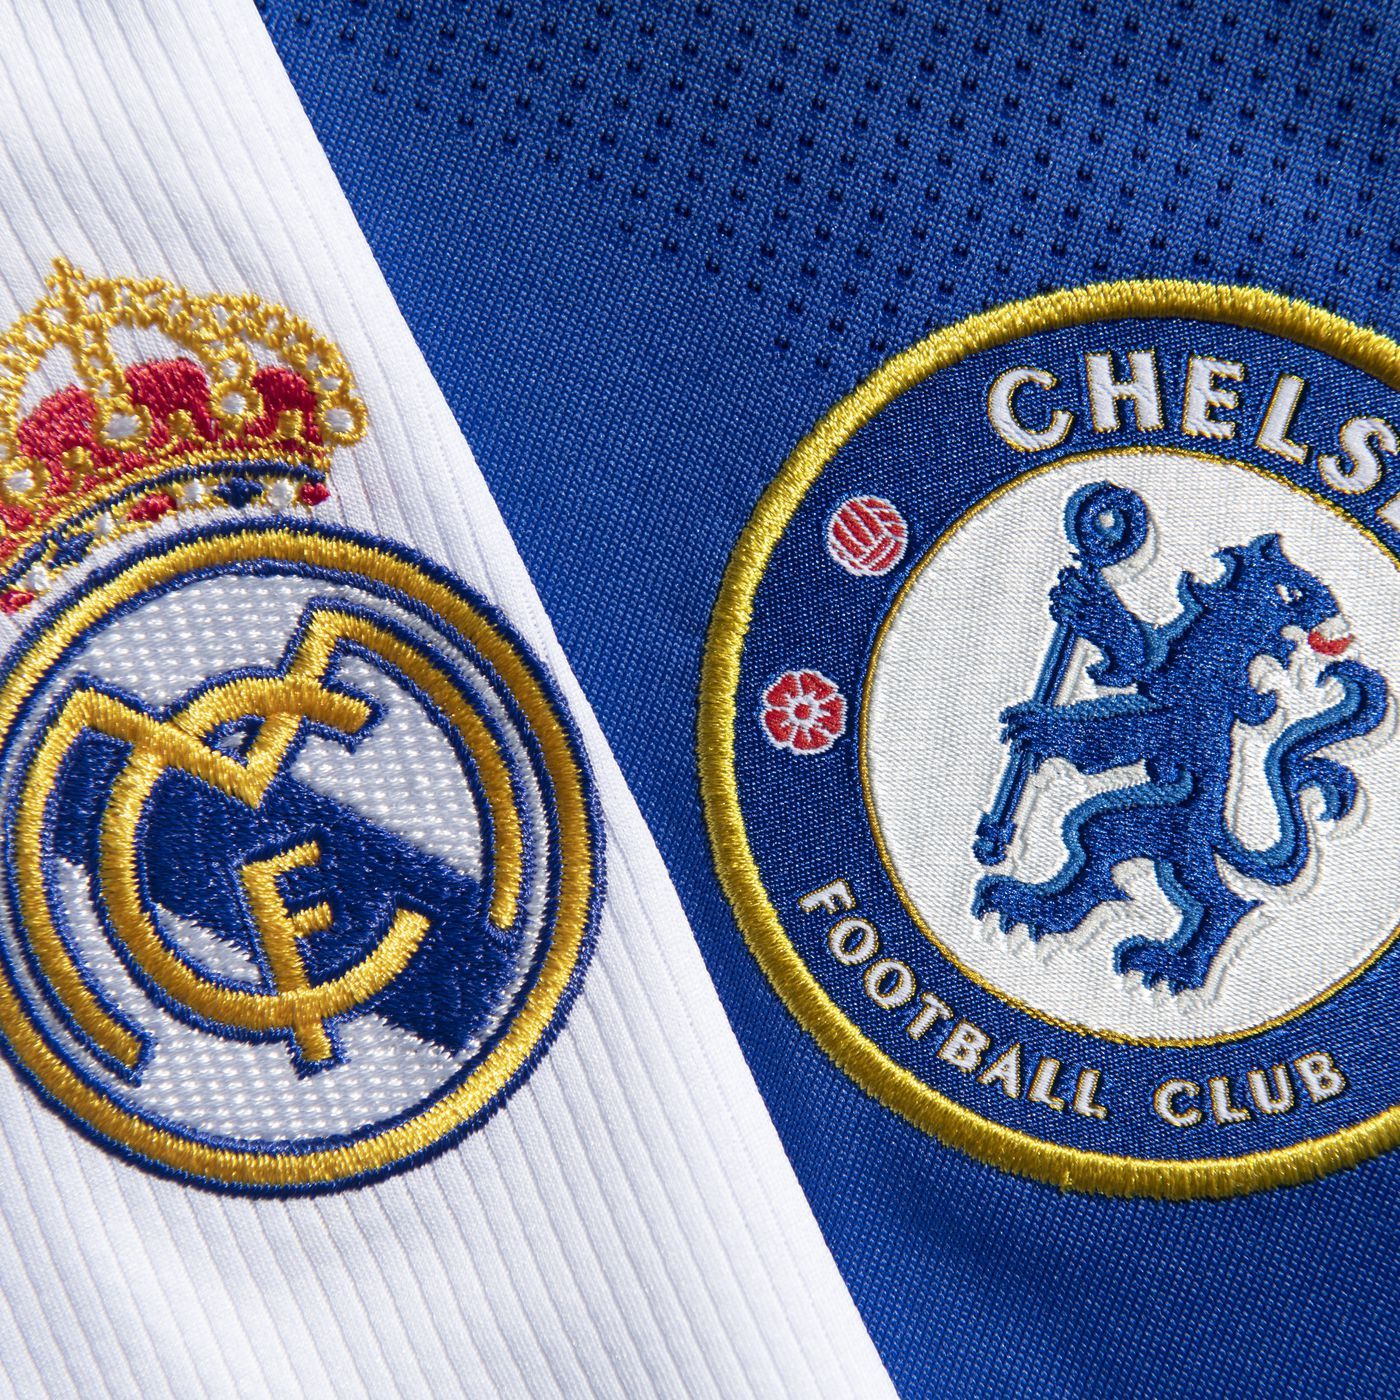 Chelsea to face Real Madrid in Champions League semifinals Ain't Got No History